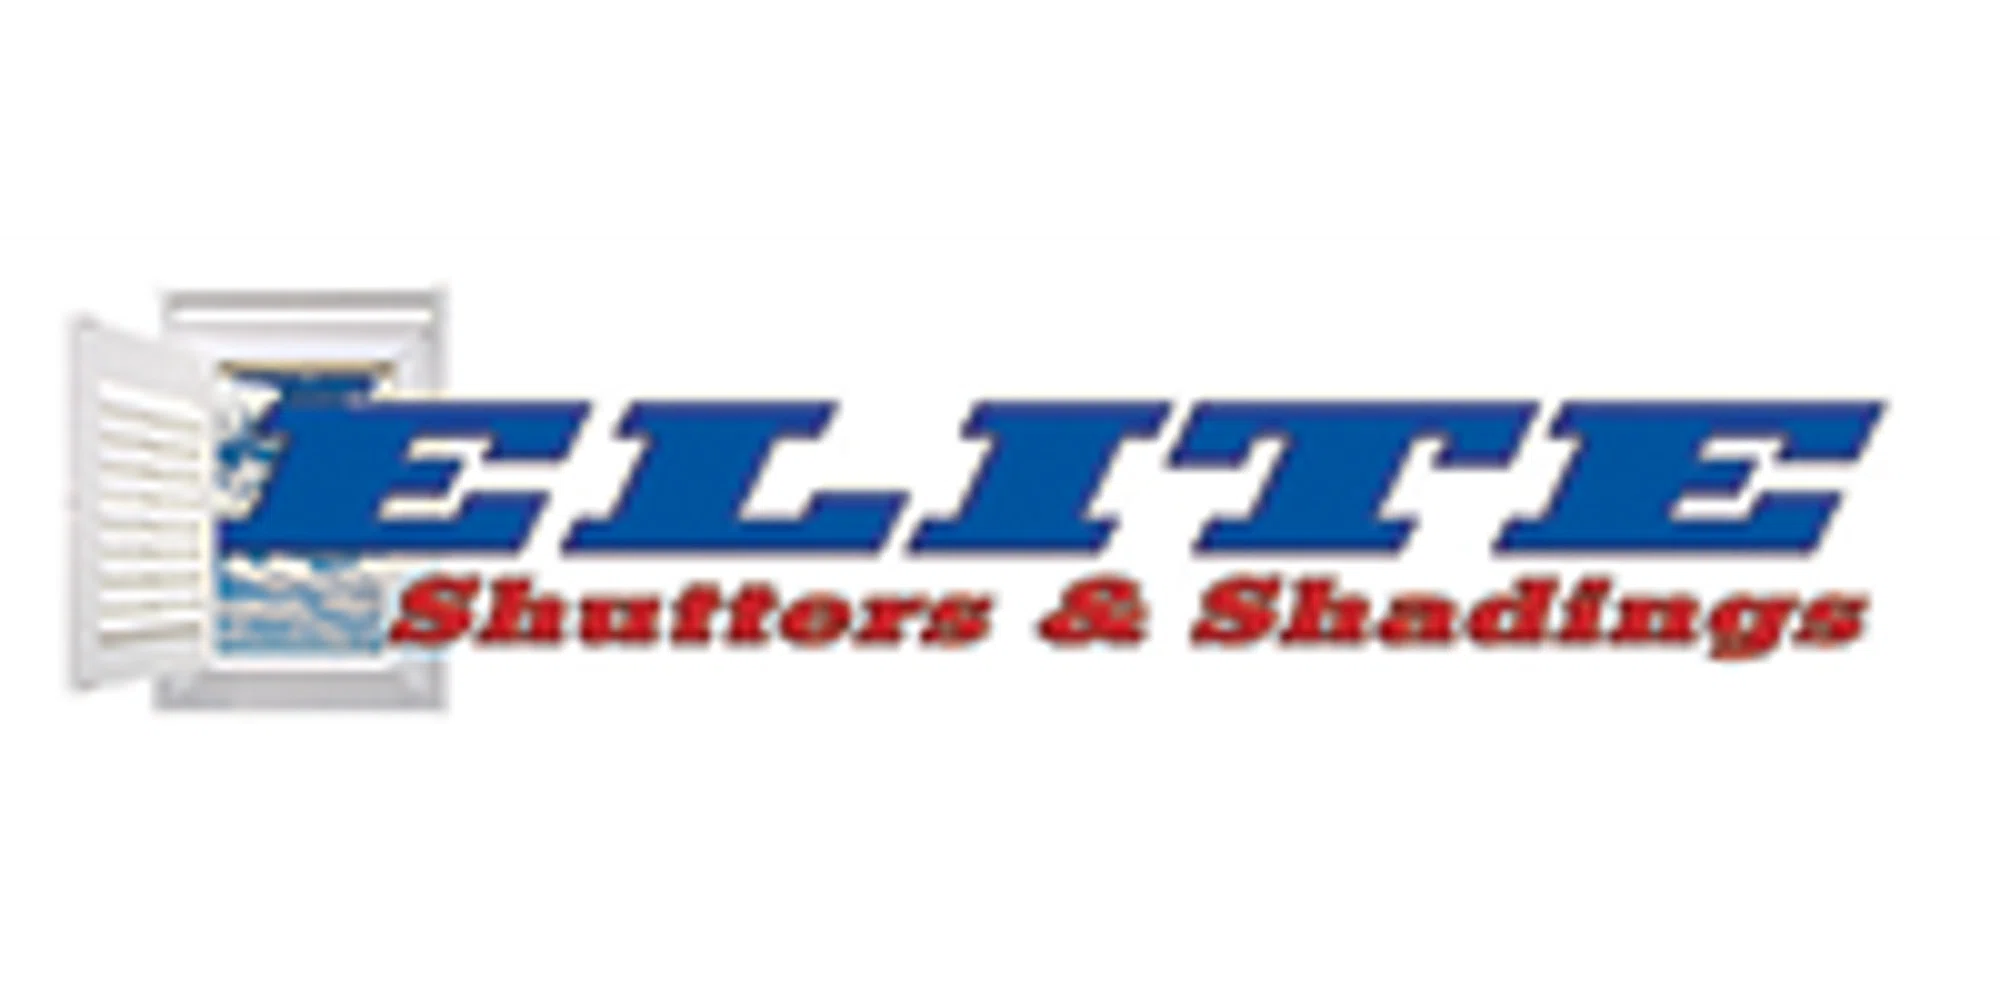 Elite Shutters And Shadings